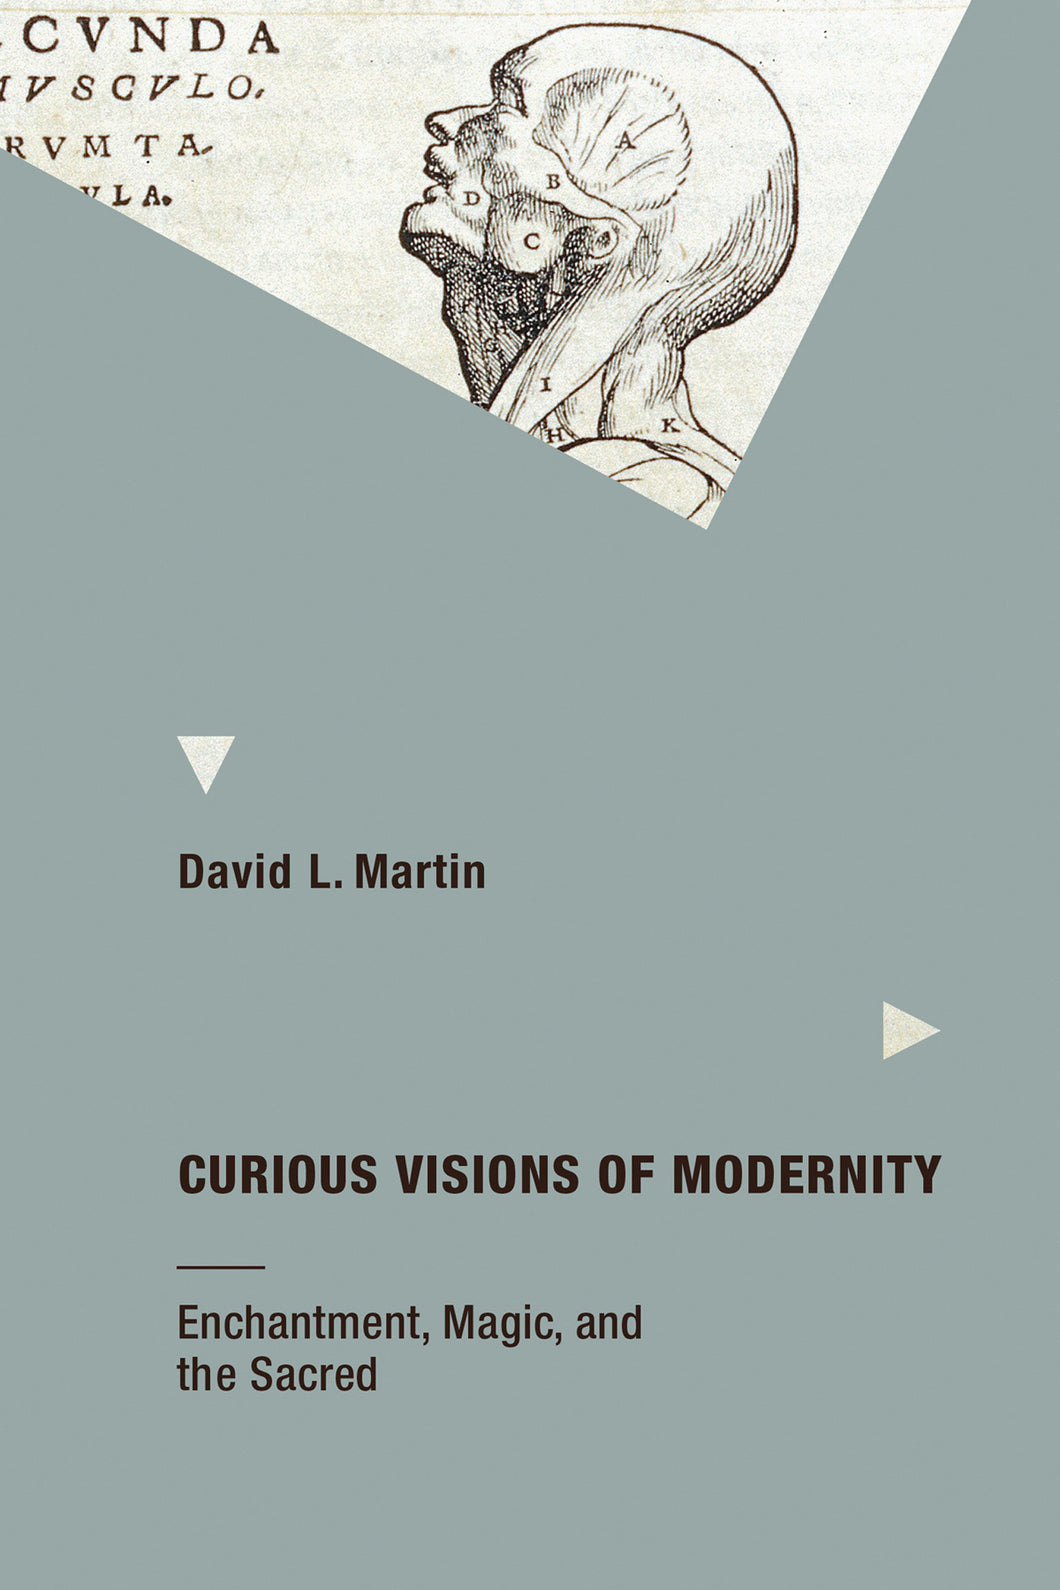 Curious Visions of Modernity: Enchantment, Magic, and the Sacred